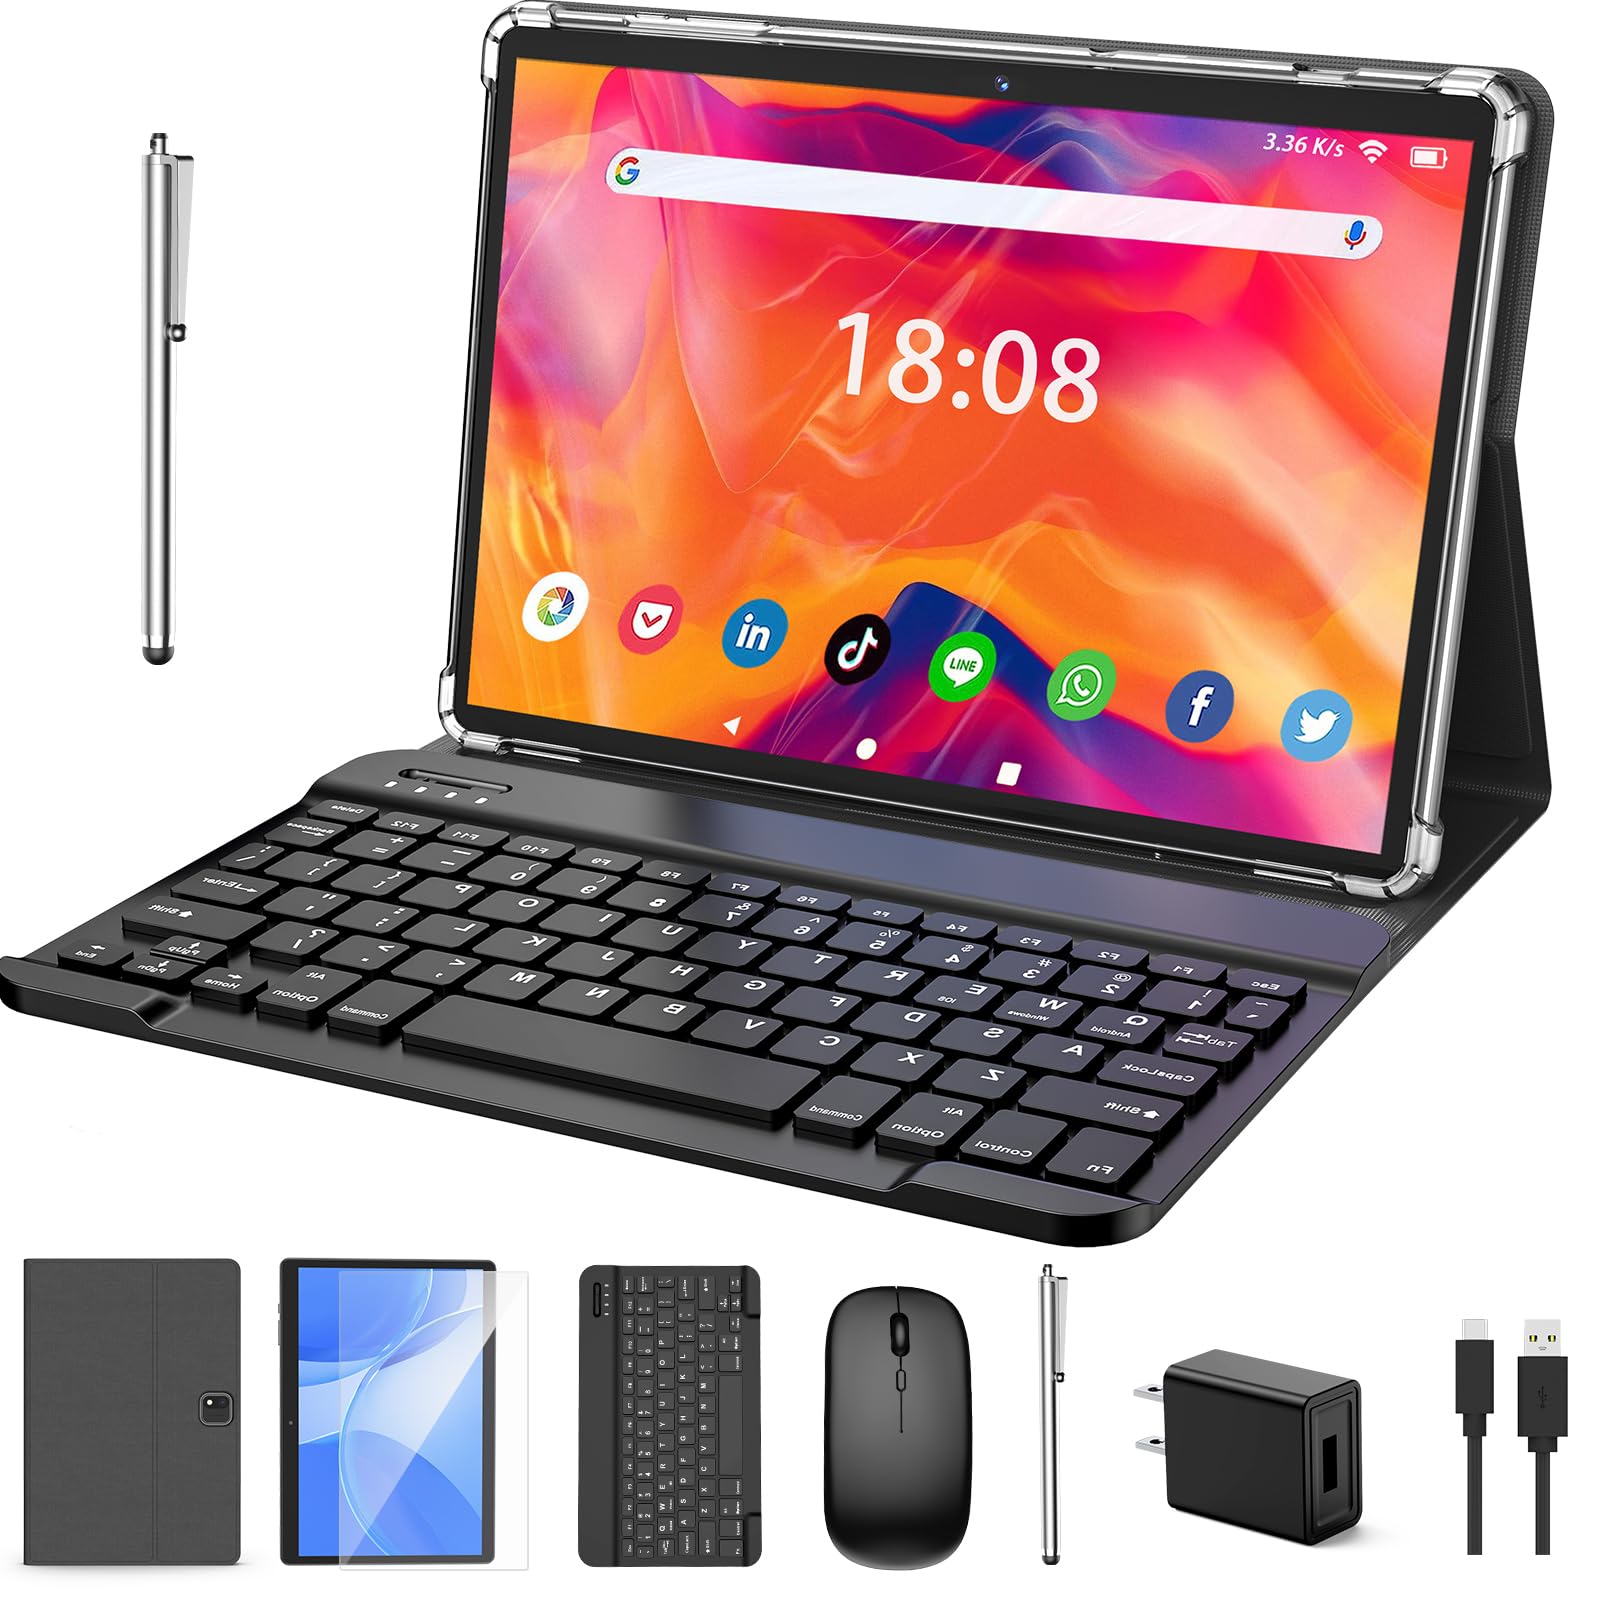 RliyOliy Android Tablet, 2 in 1 Tablet with Keyboard, 10 inch Android 13 Tablet, 6GB RAM 128GB ROM 1TB Expand, Tablet with Case, Mouse, Stylus, 8000mAh Battery, 2.4G/5G WiFi, GPS, Dual Camera